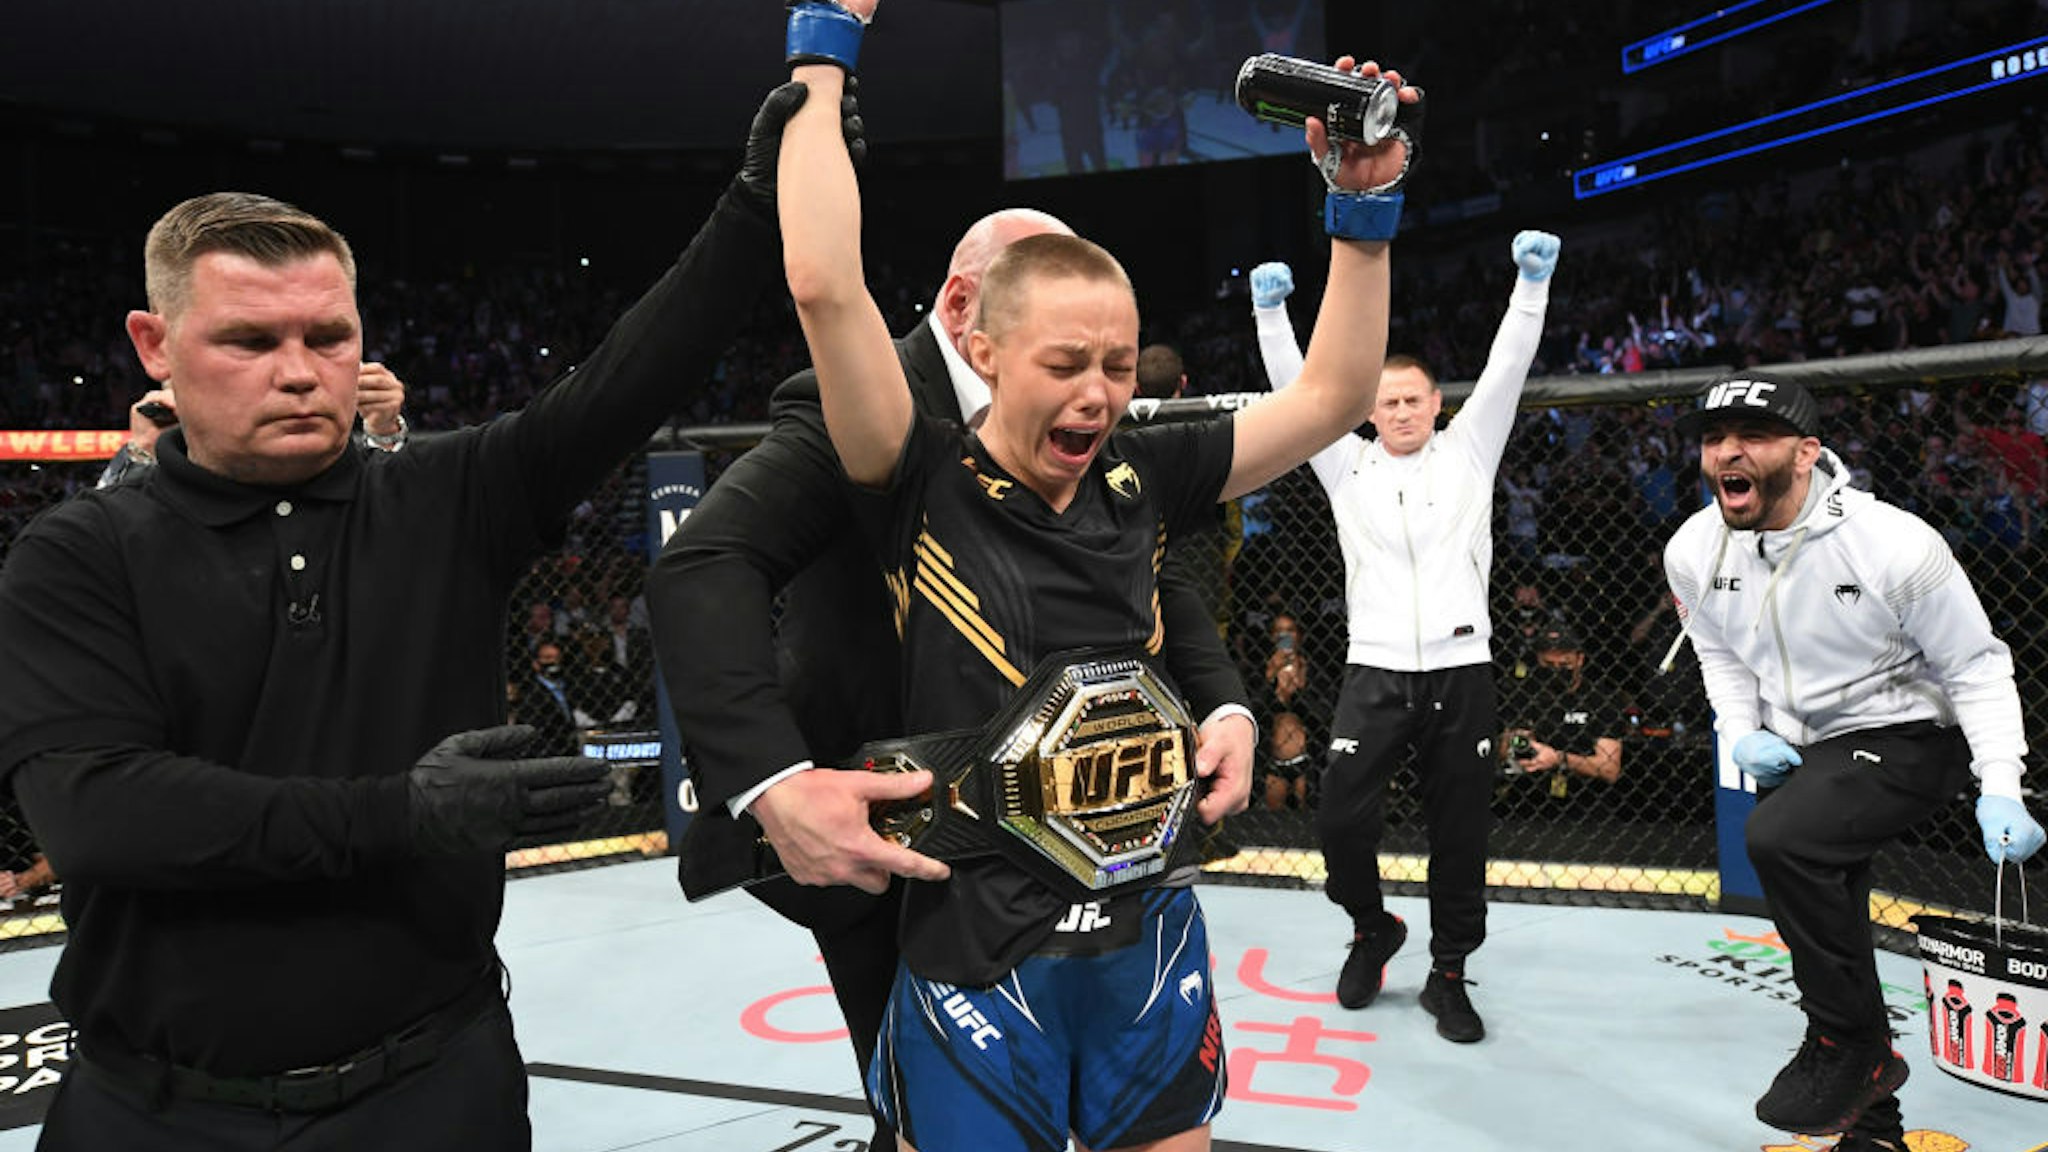 JACKSONVILLE, FLORIDA - APRIL 24: Rose Namajunas reacts after defeating Zhang Weili of China in their UFC women's strawweight championship bout as UFC President Dana White places the championship belt on her during the UFC 261 event at VyStar Veterans Memorial Arena on April 24, 2021 in Jacksonville, Florida. (Photo by Josh Hedges/Zuffa LLC)